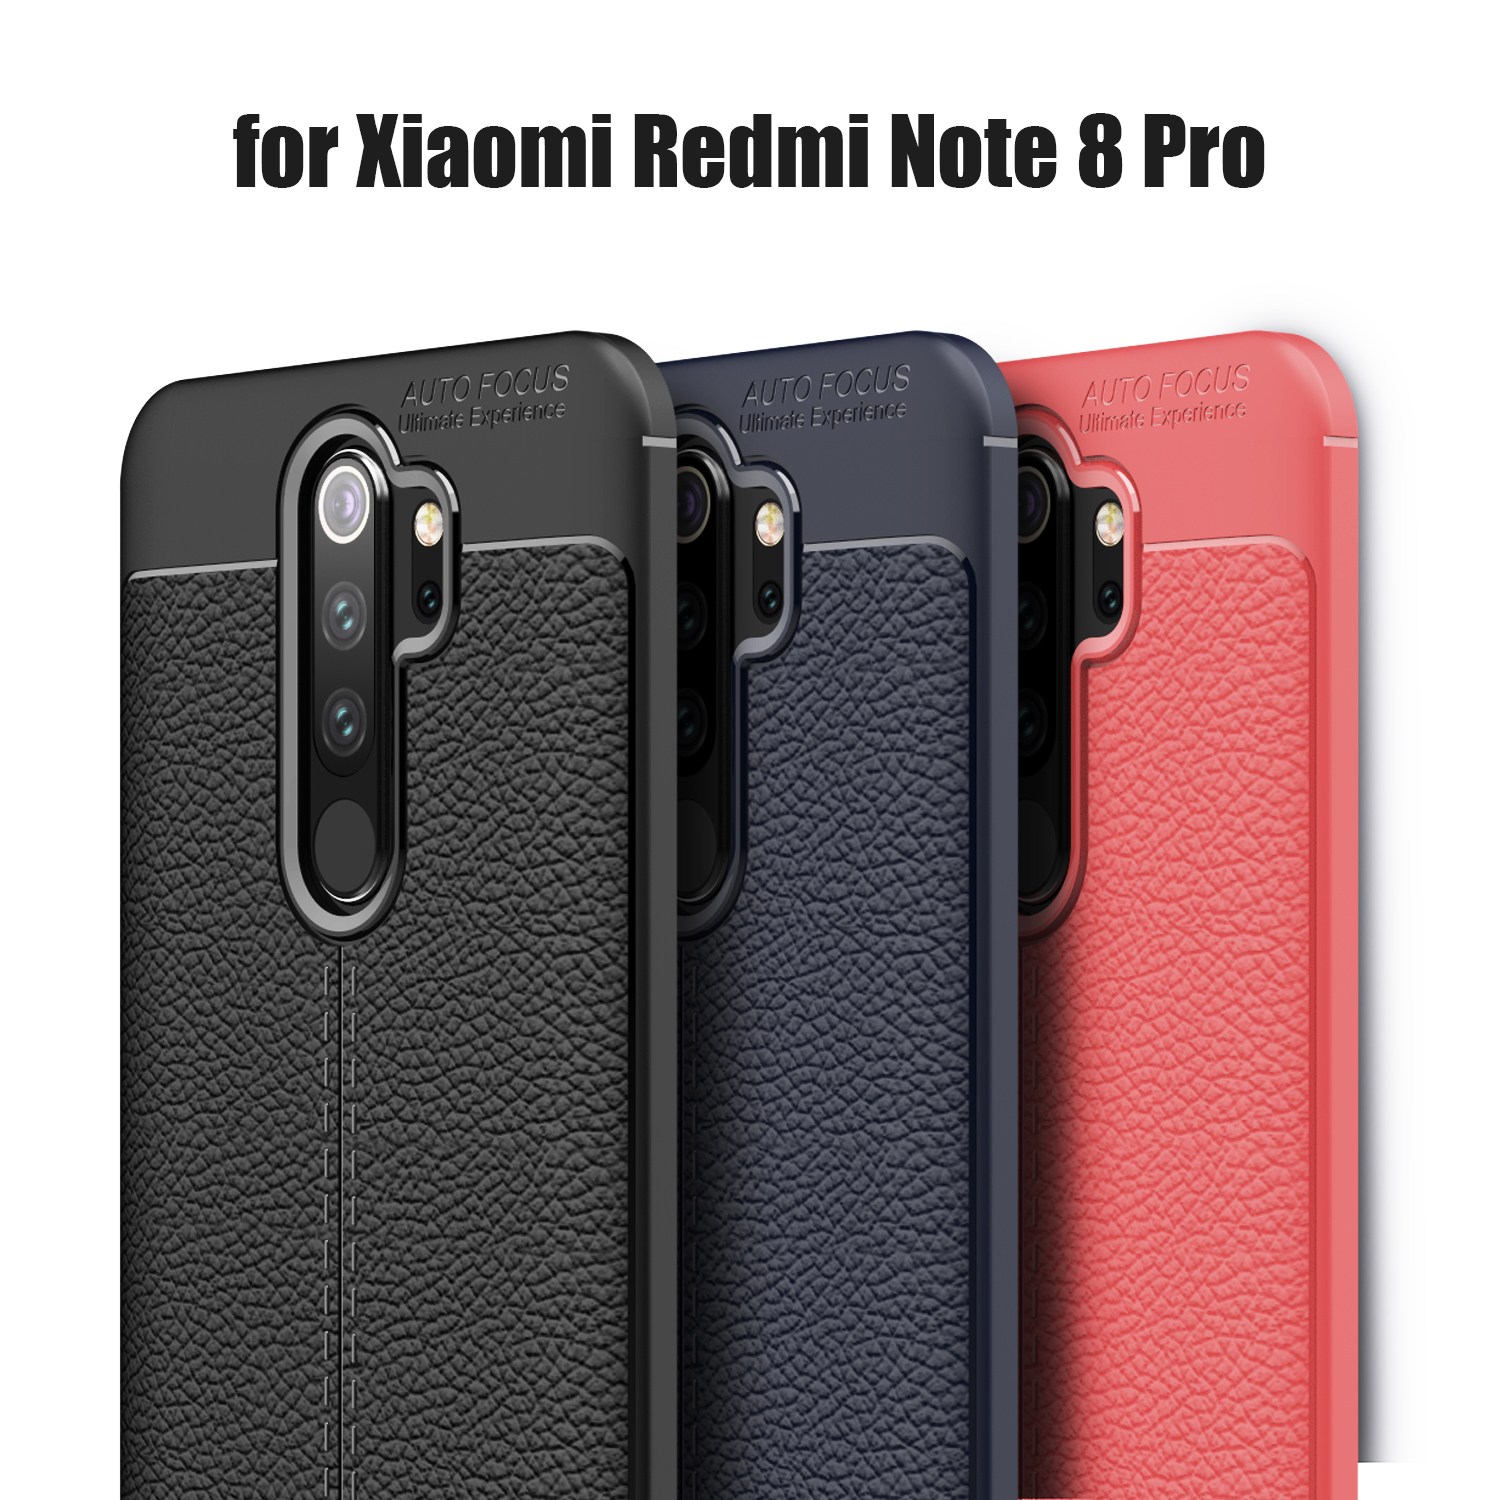 Bakeey-Xiaomi-Redmi-Note-8-Pro-Luxury-Litchi-Pattern-Shockproof-PU-Leather-Protective-Case-1588375-1